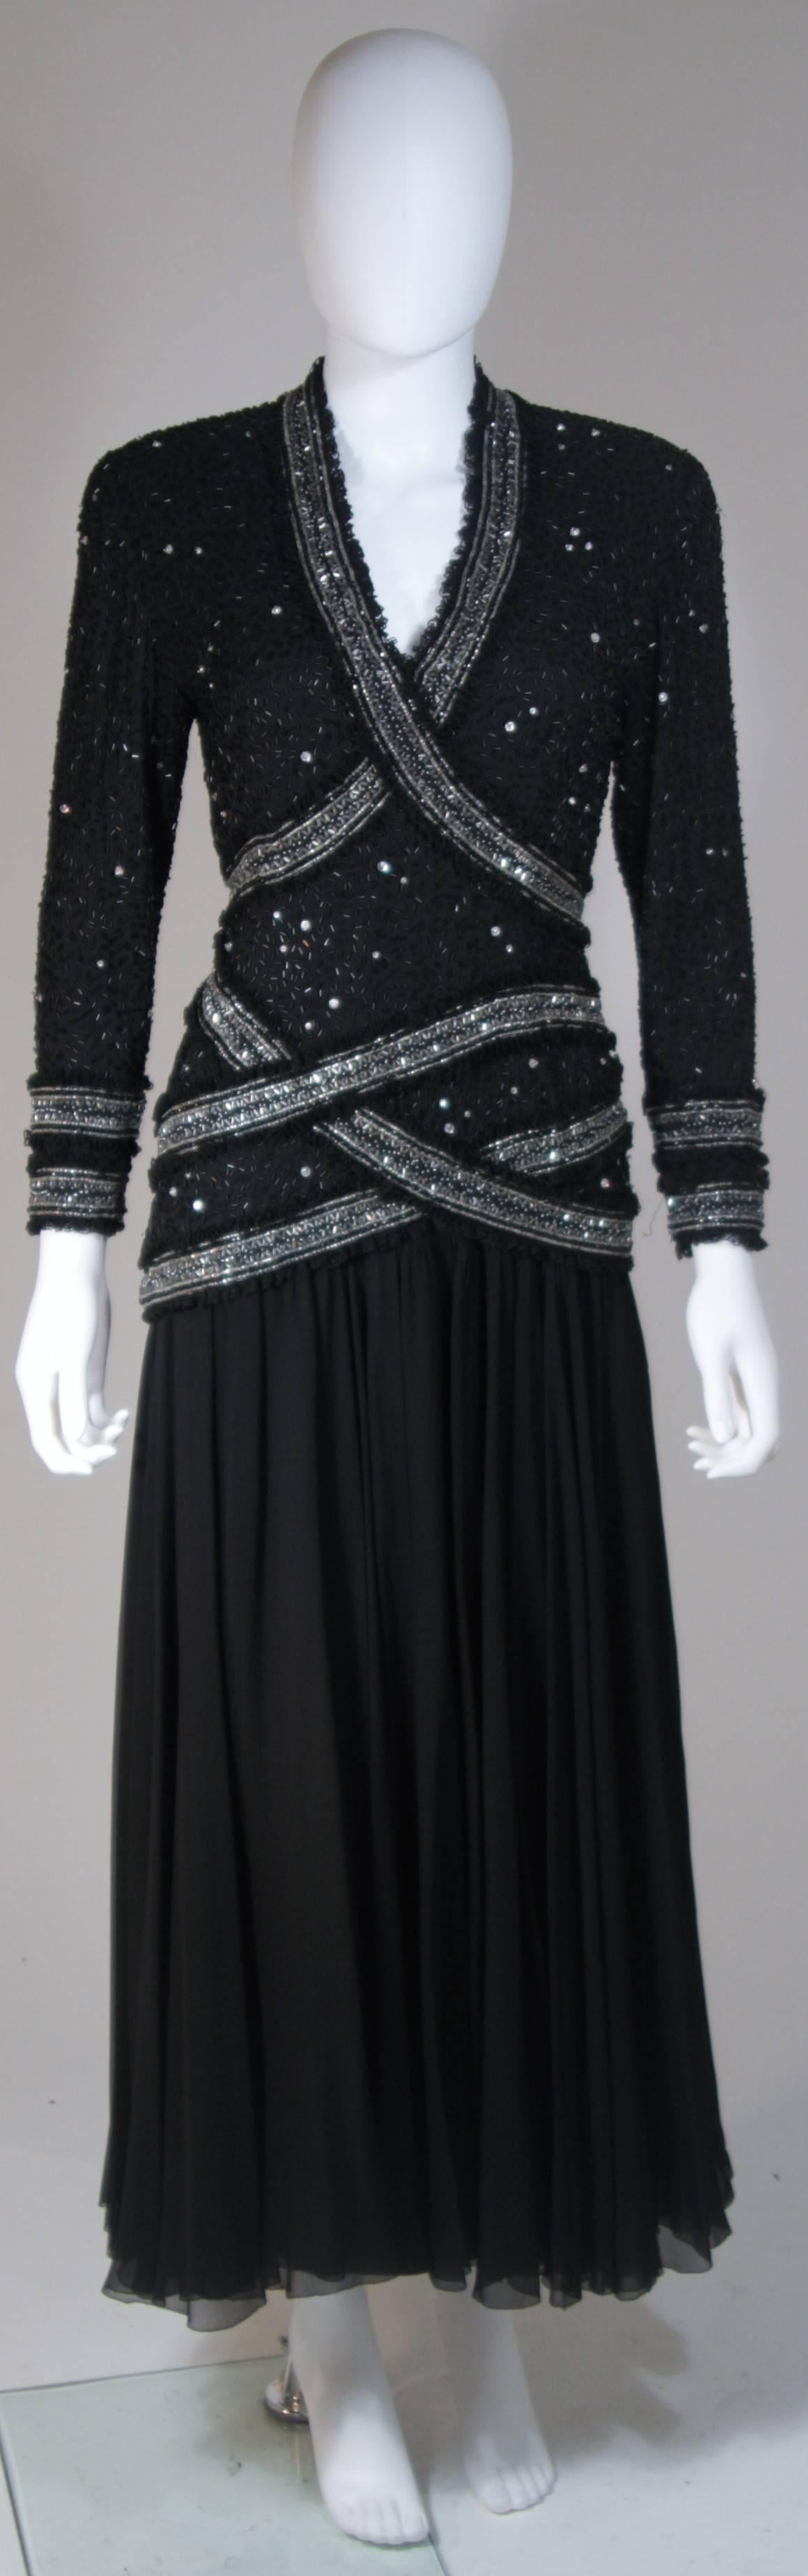  This Fabrice New York Couture gown is composed of a black silk chiffon and features an embellished bodice trimmed with lace. There is a center back zipper closure and zippers at the sleeve end. In excellent vintage condition. 

  **Please